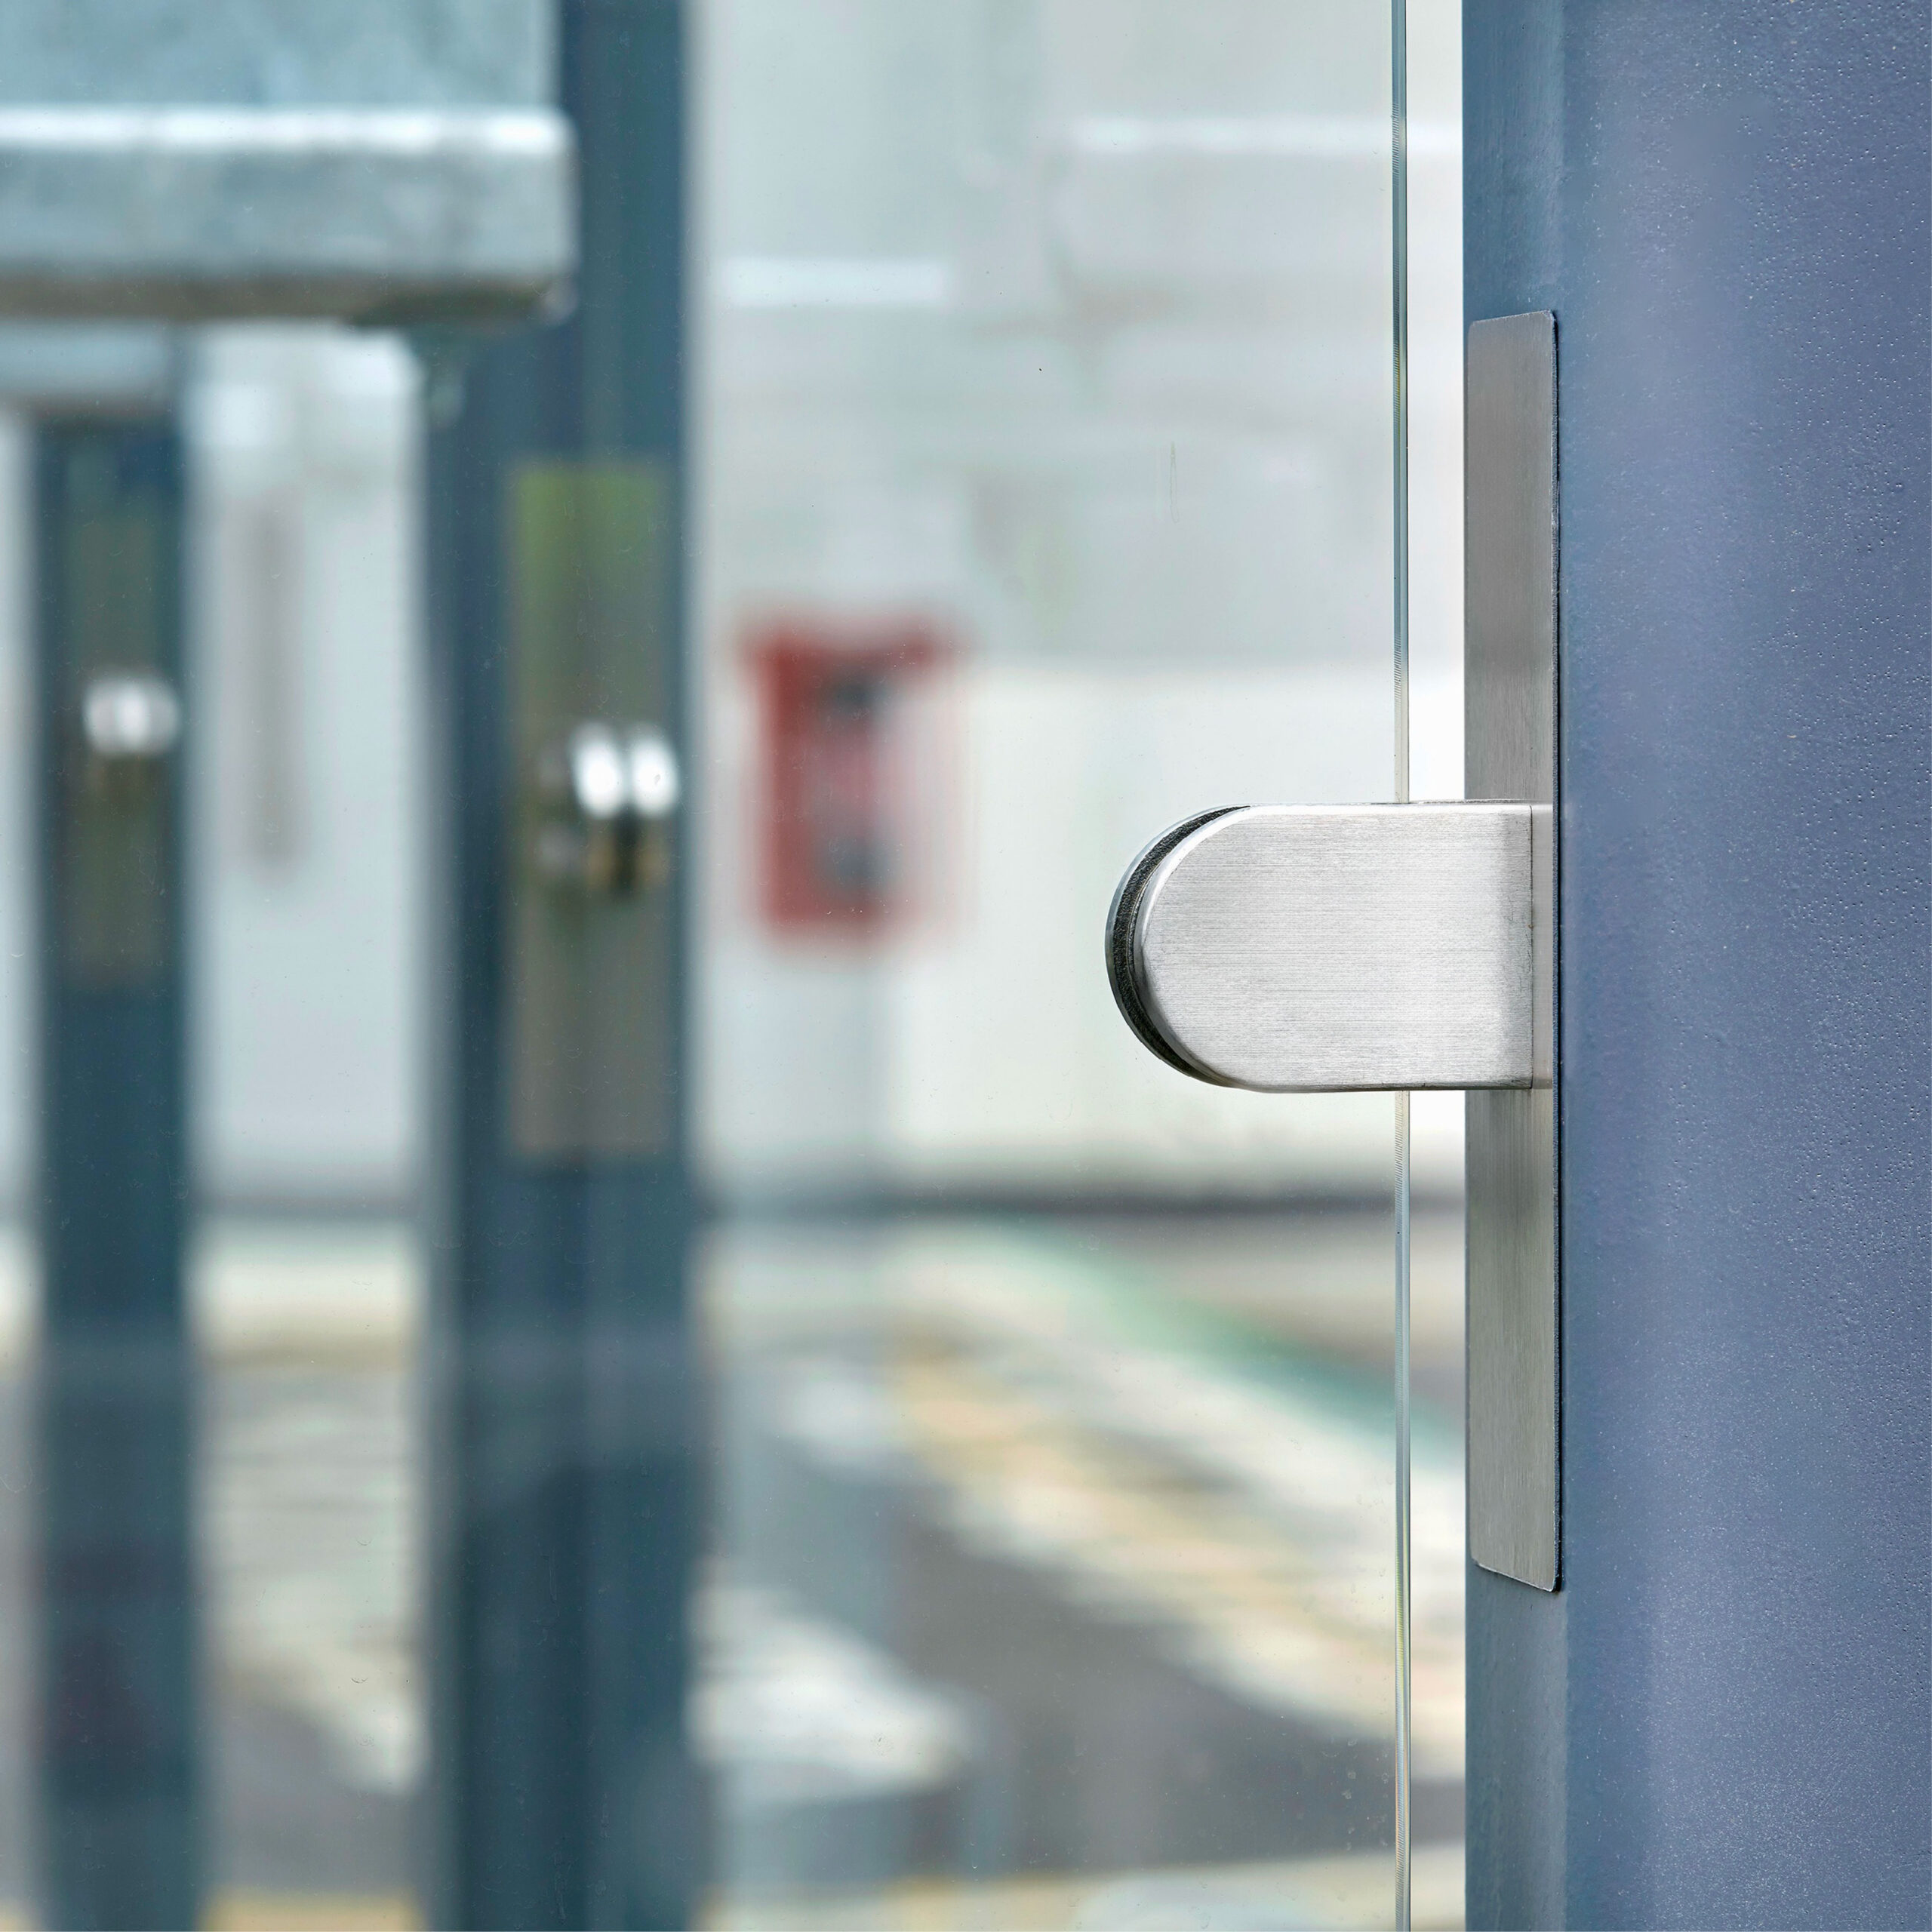 Close-up of a modern, stainless steel door handle on a glass door, showing a blurred urban background with another glass door and a street beyond.